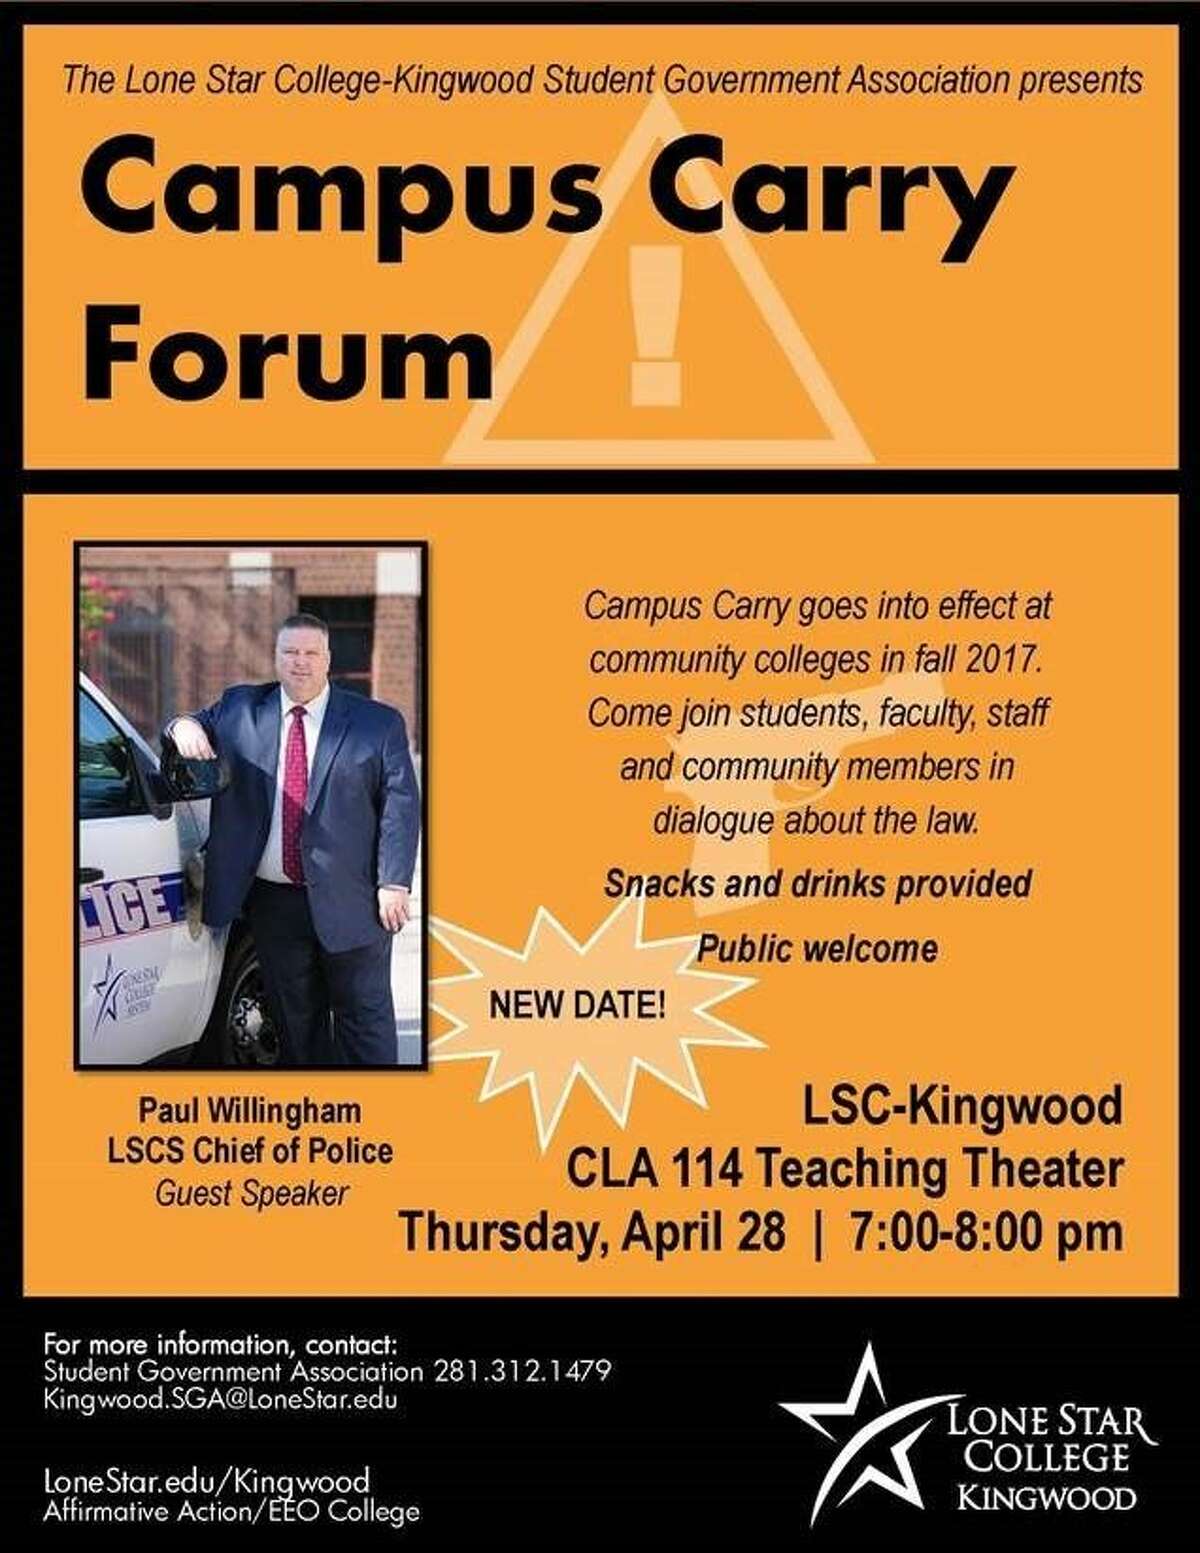 The LSC-Kingwood’s Student Government Association (SGA) invites campus and community members to its Campus Carry Forum Thursday to discuss the Campus Carry law that goes into effect at community colleges in fall 2017.